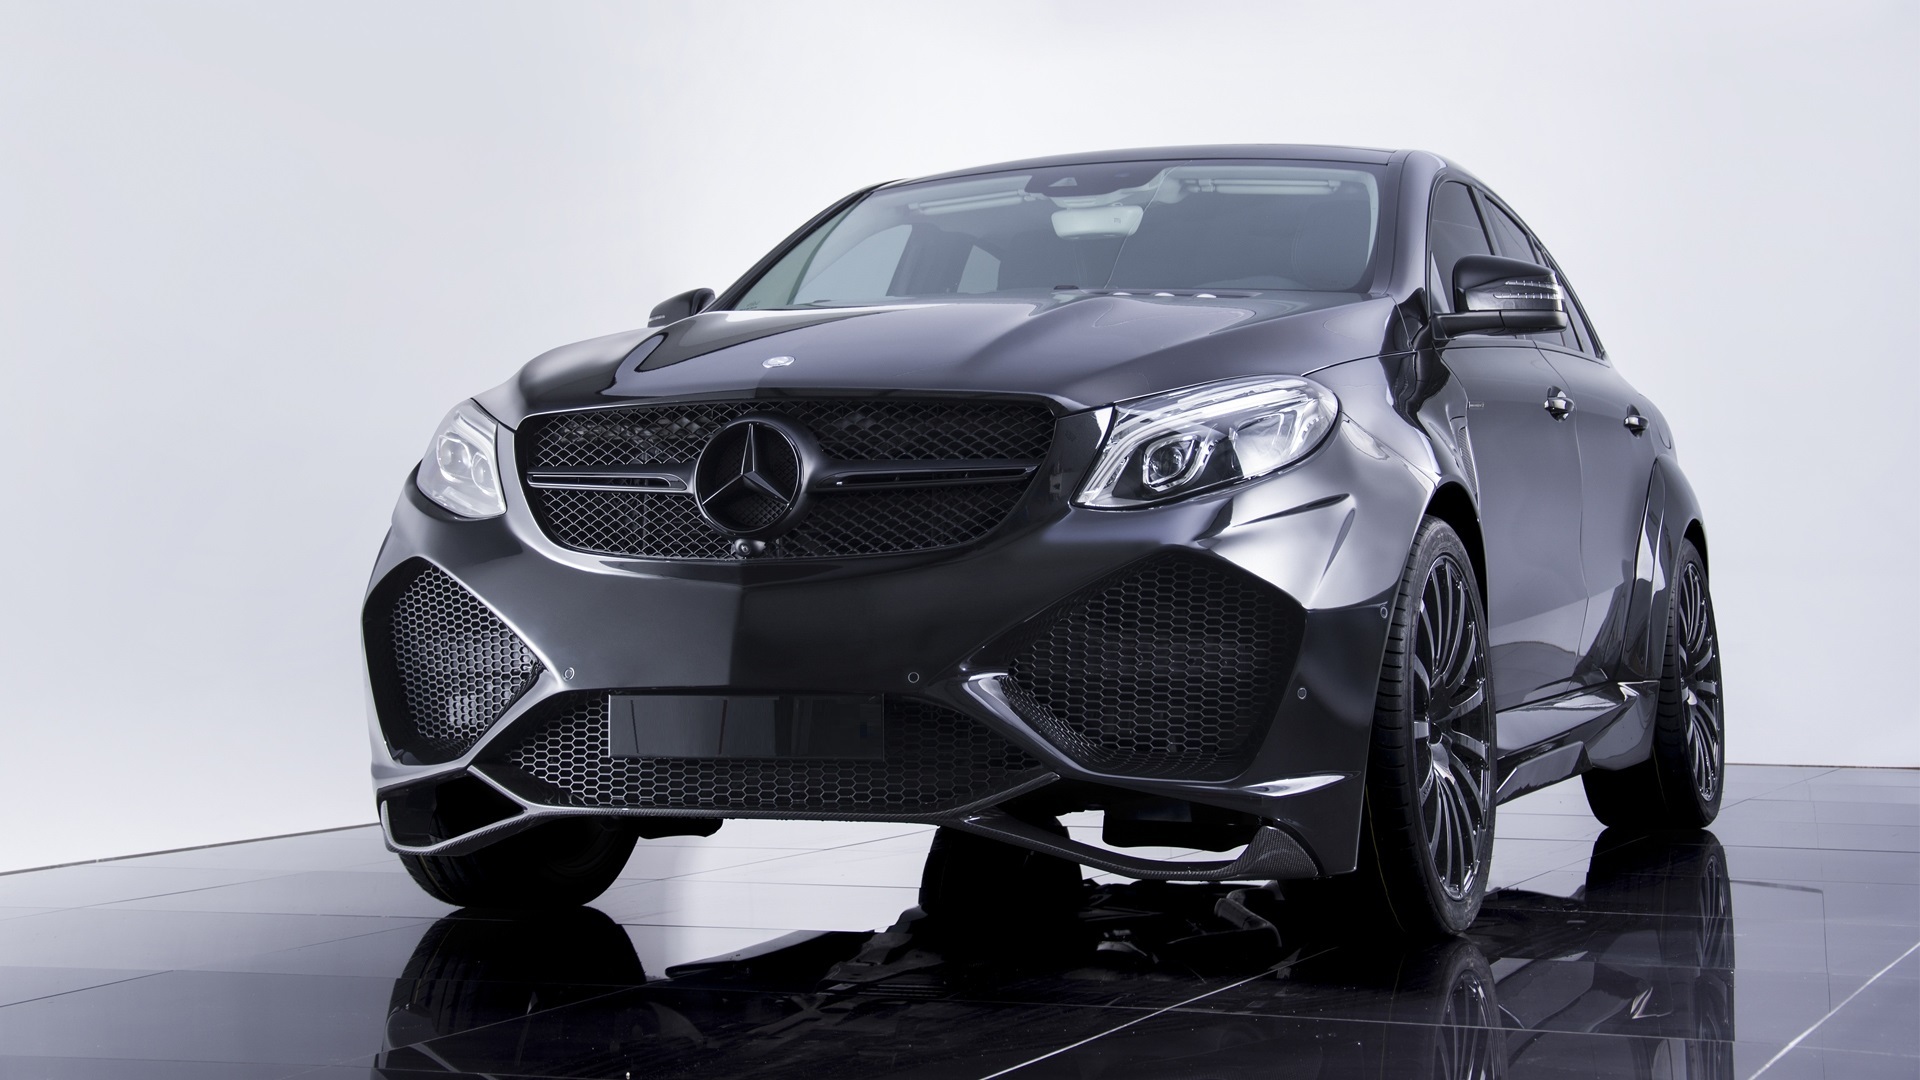 Onyx G6 body kit for Mercedes-Benz AMG GLE 63s coupe new model